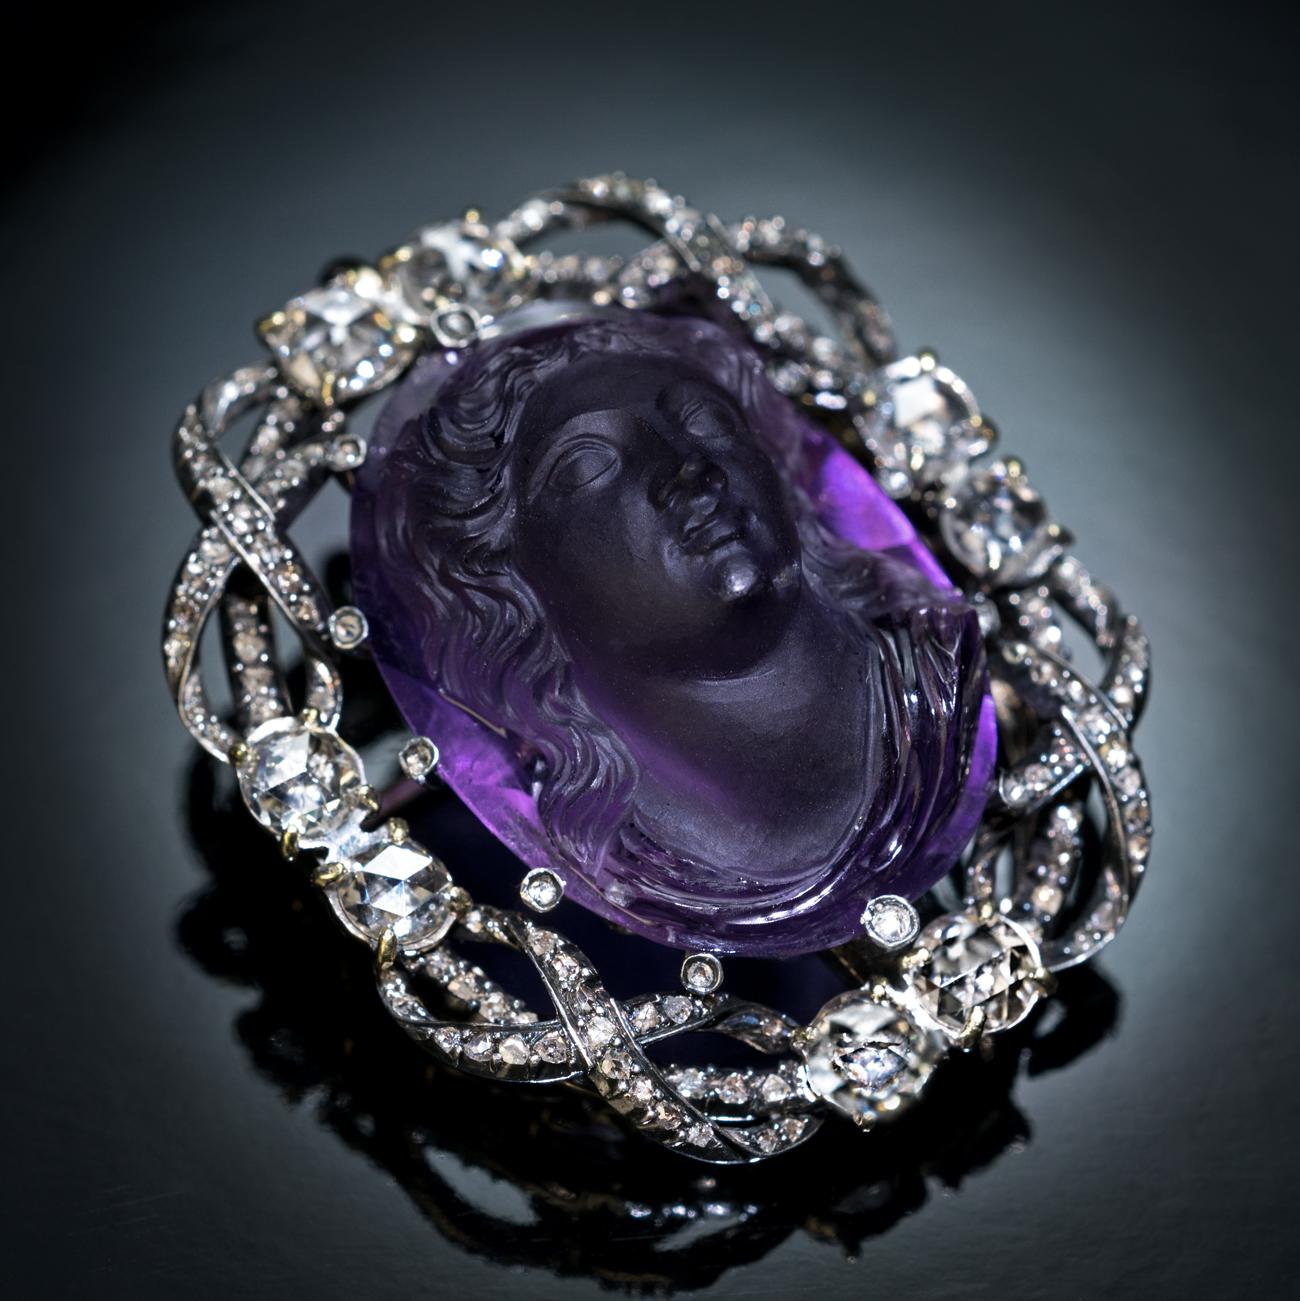 Circa 1885

This very rare antique Belle Epoque amethyst cameo brooch / pendant boasts a beautiful neoclassical portrait of a woman carved in high relief with unparalleled precision and encompassed by a rich and chunky frame of rose cut